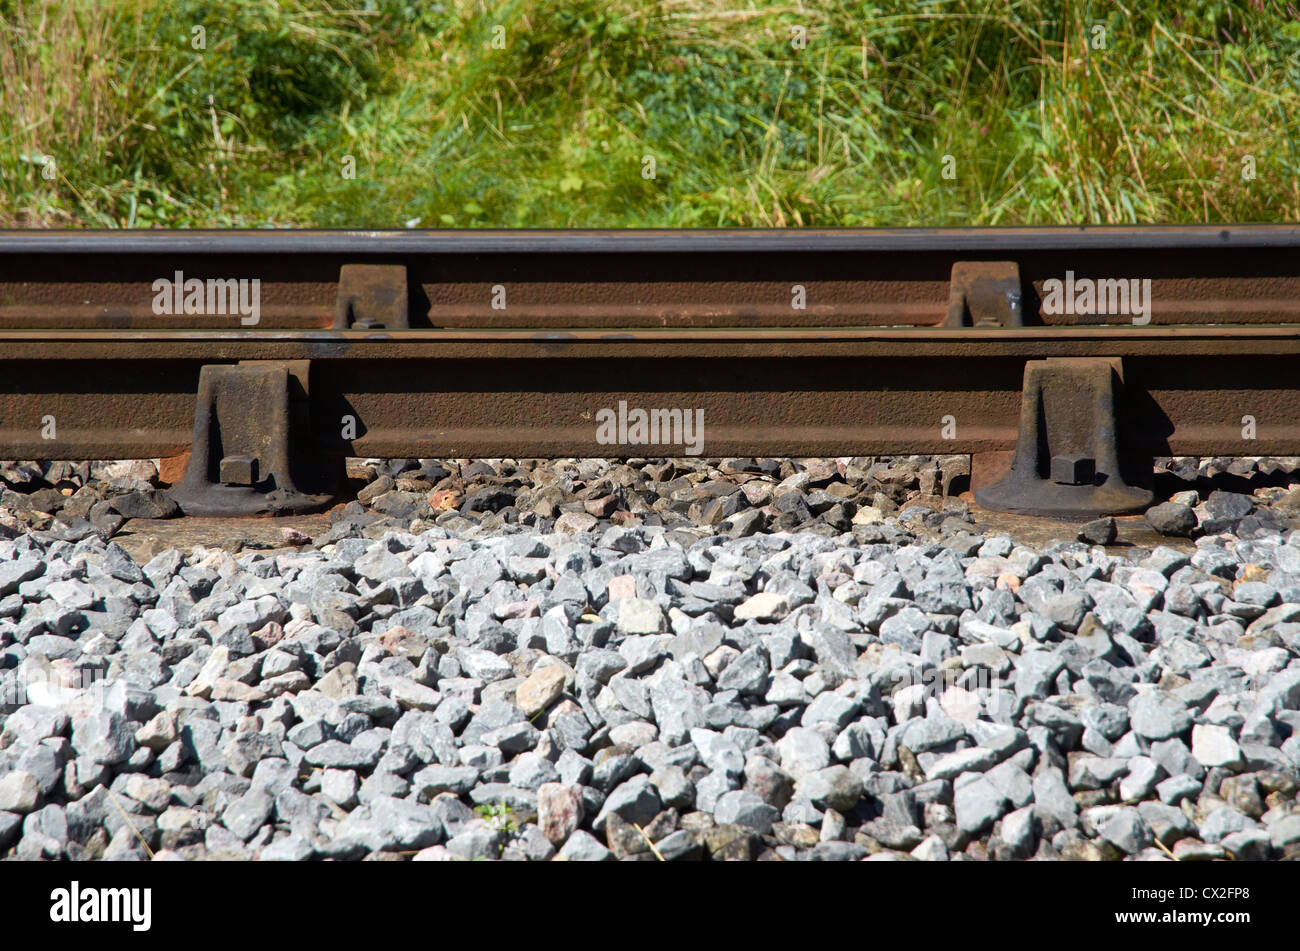 Railway track  - chaired bullhead rail, concrete sleepers. Rail held in cast iron chairs by wood/metal key. Stock Photo